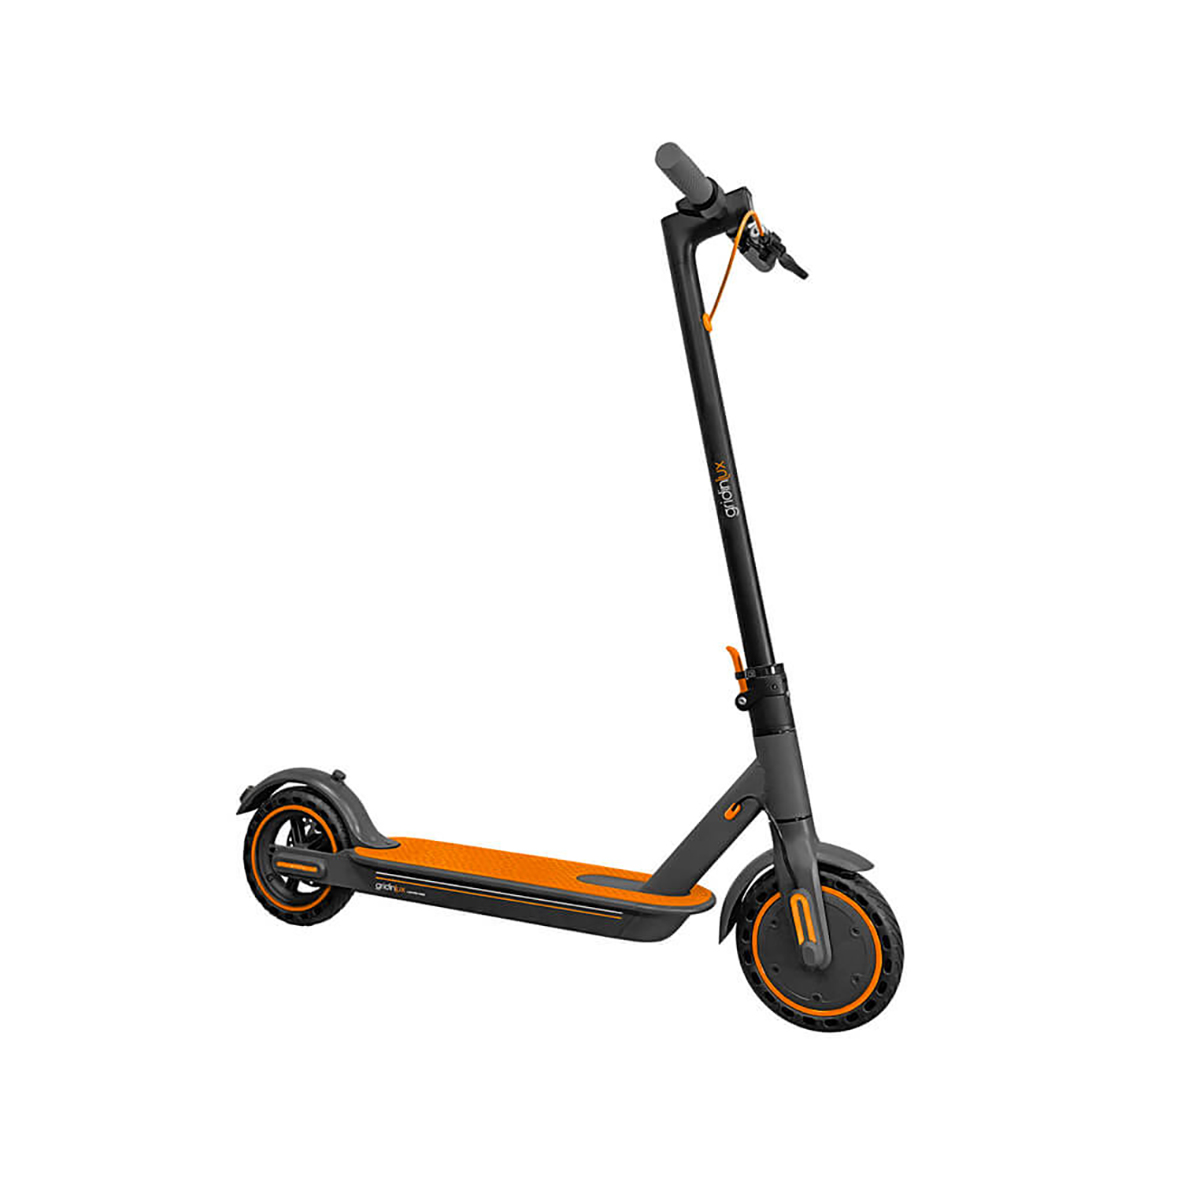 ELECTRIC SCOOTER WINNER 3000.